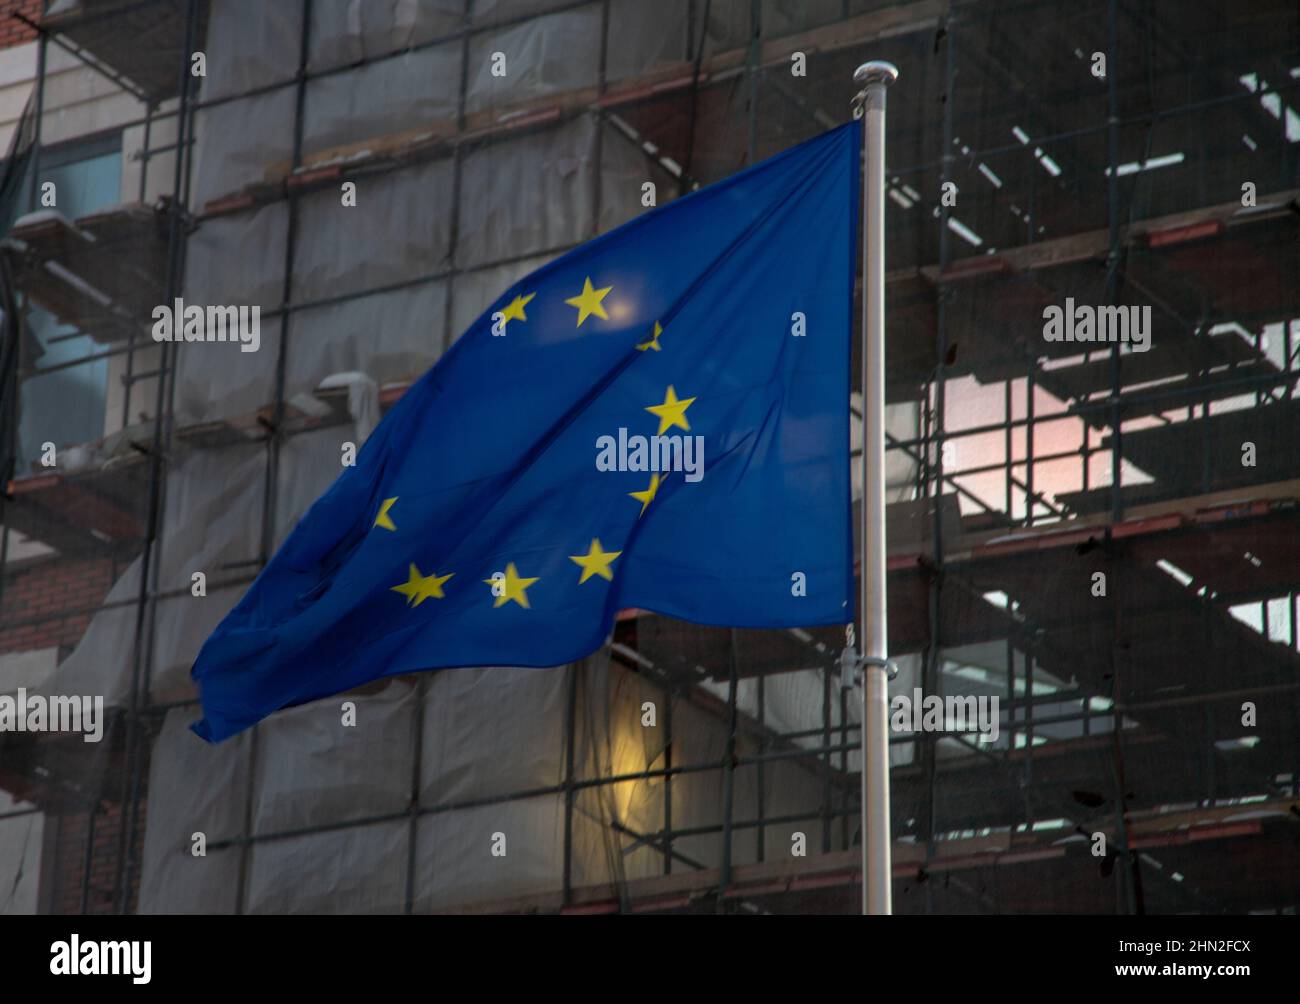 The flag of the European Union and the building under construction Stock Photo